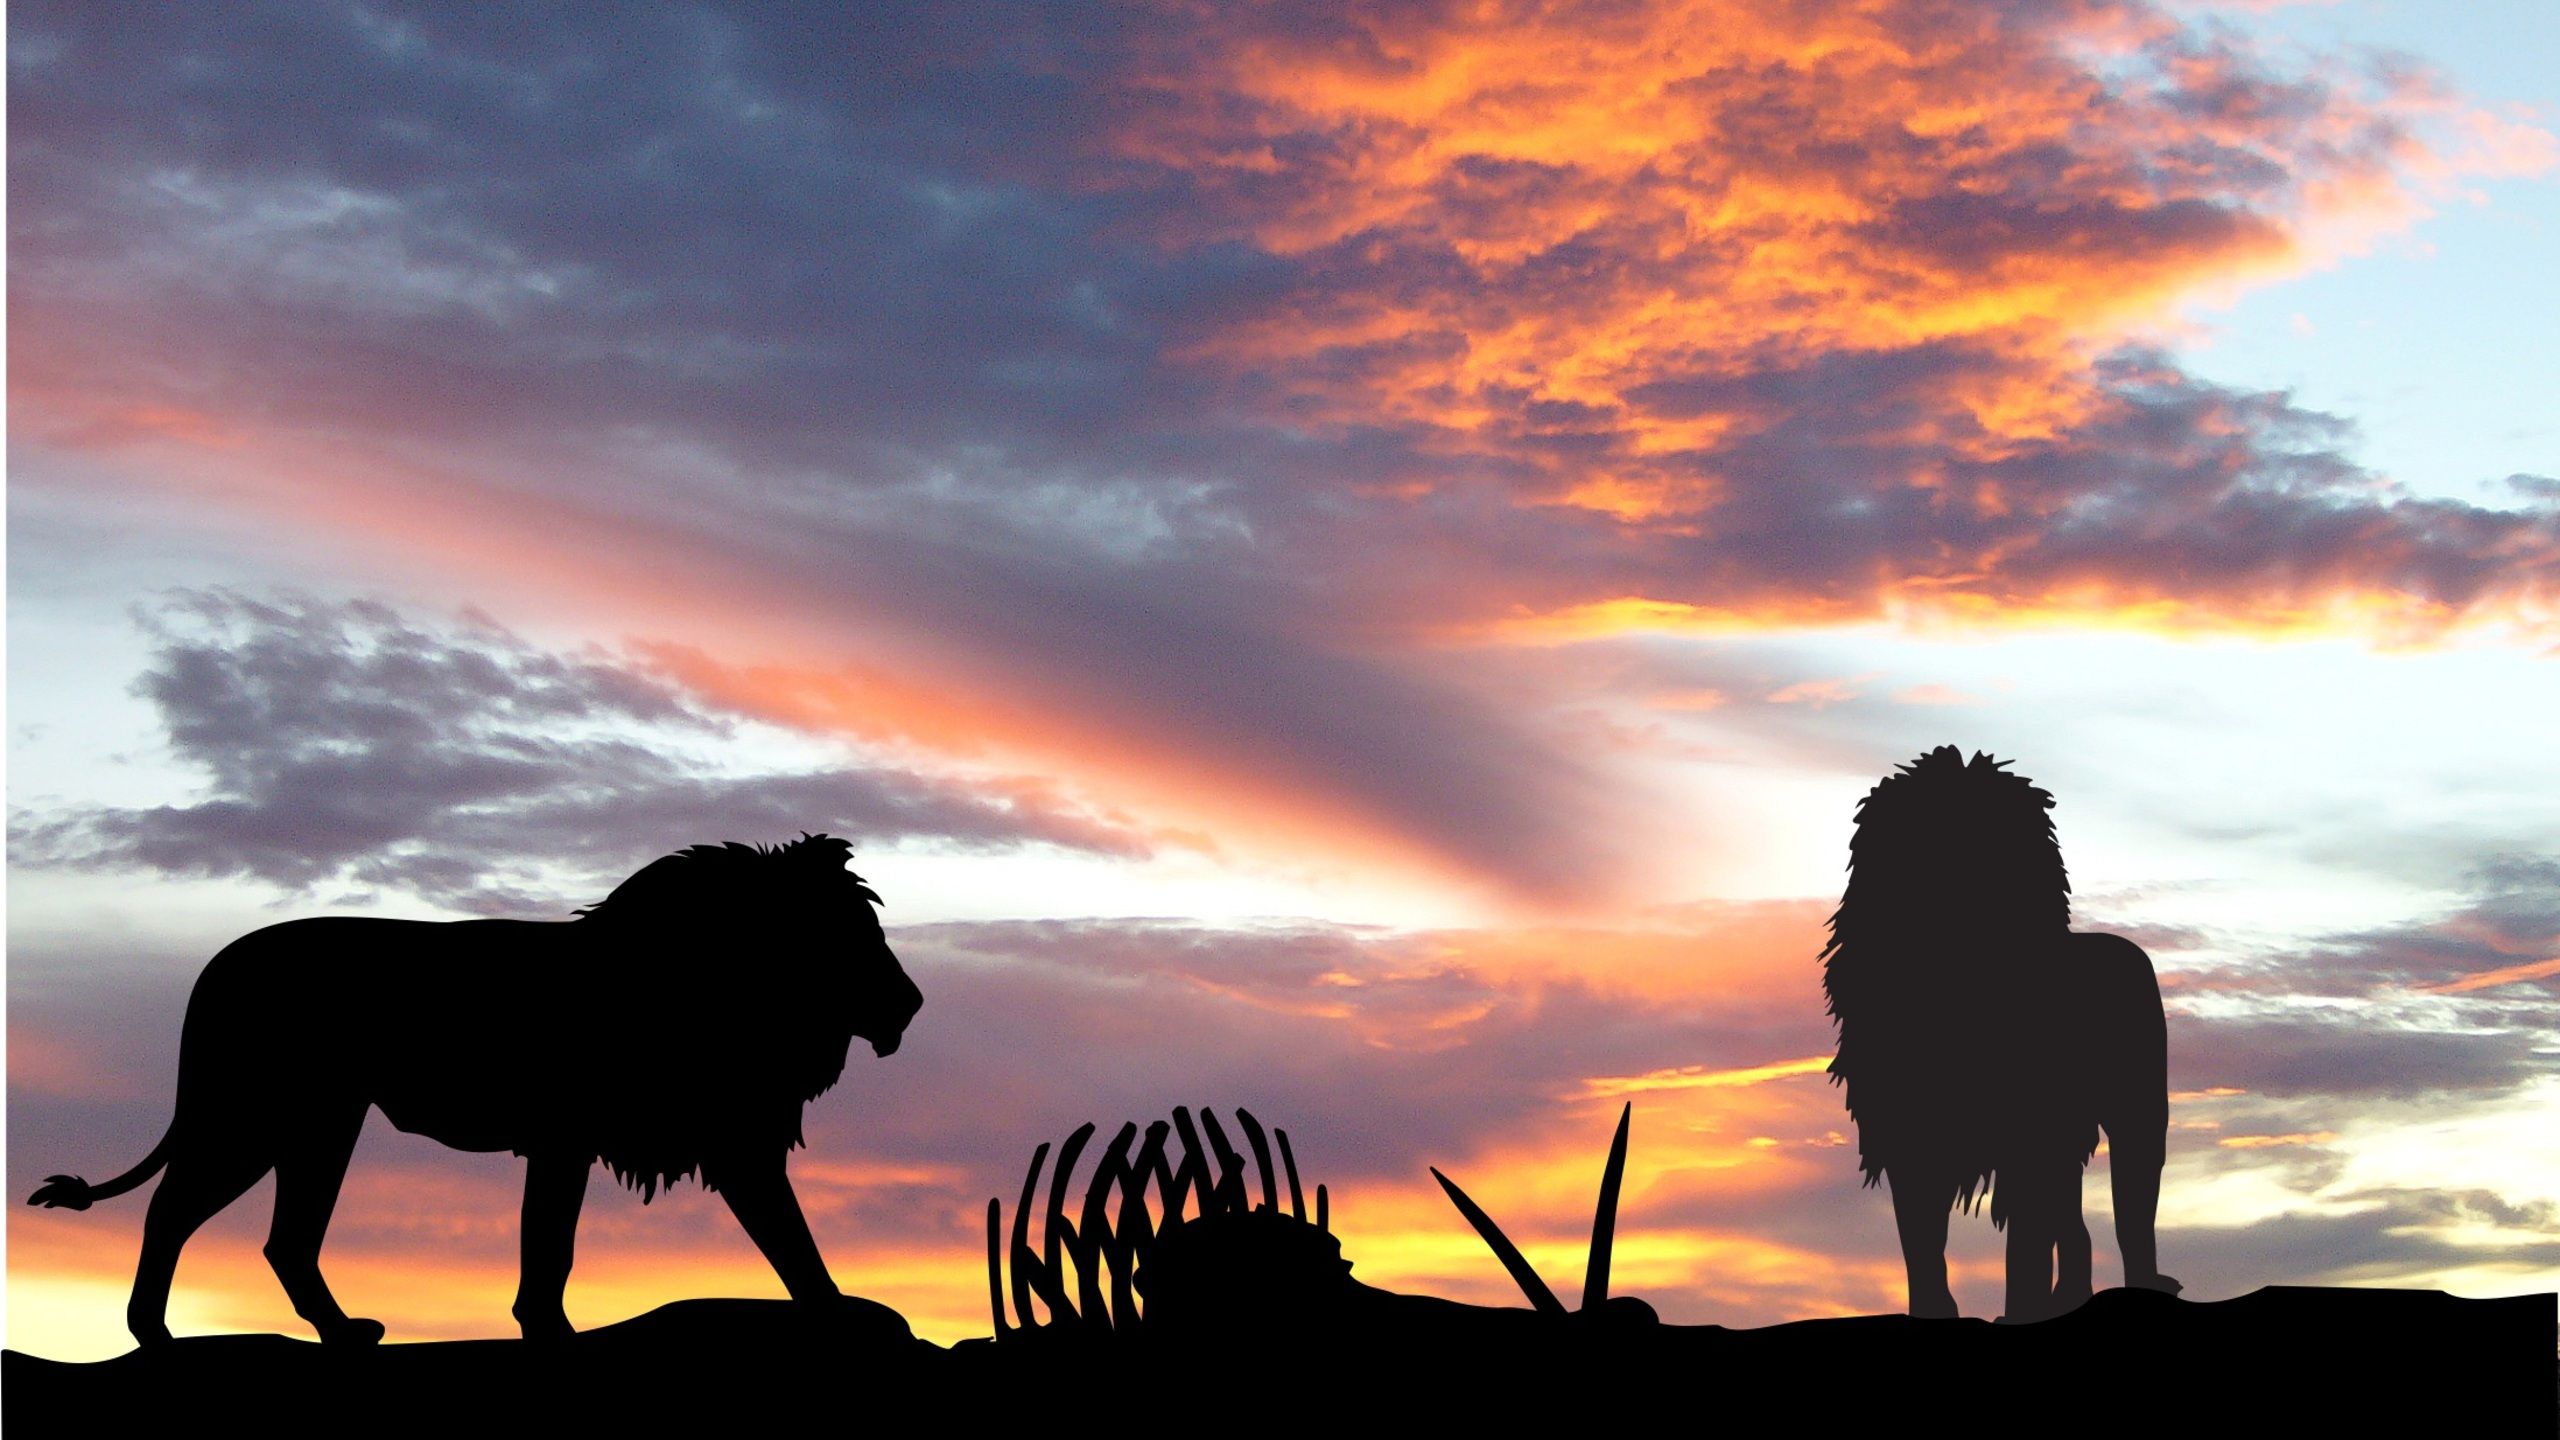 Lions Africa Silhouette Sunset 1440P Resolution HD 4k Wallpaper, Image, Background, Photo and Picture